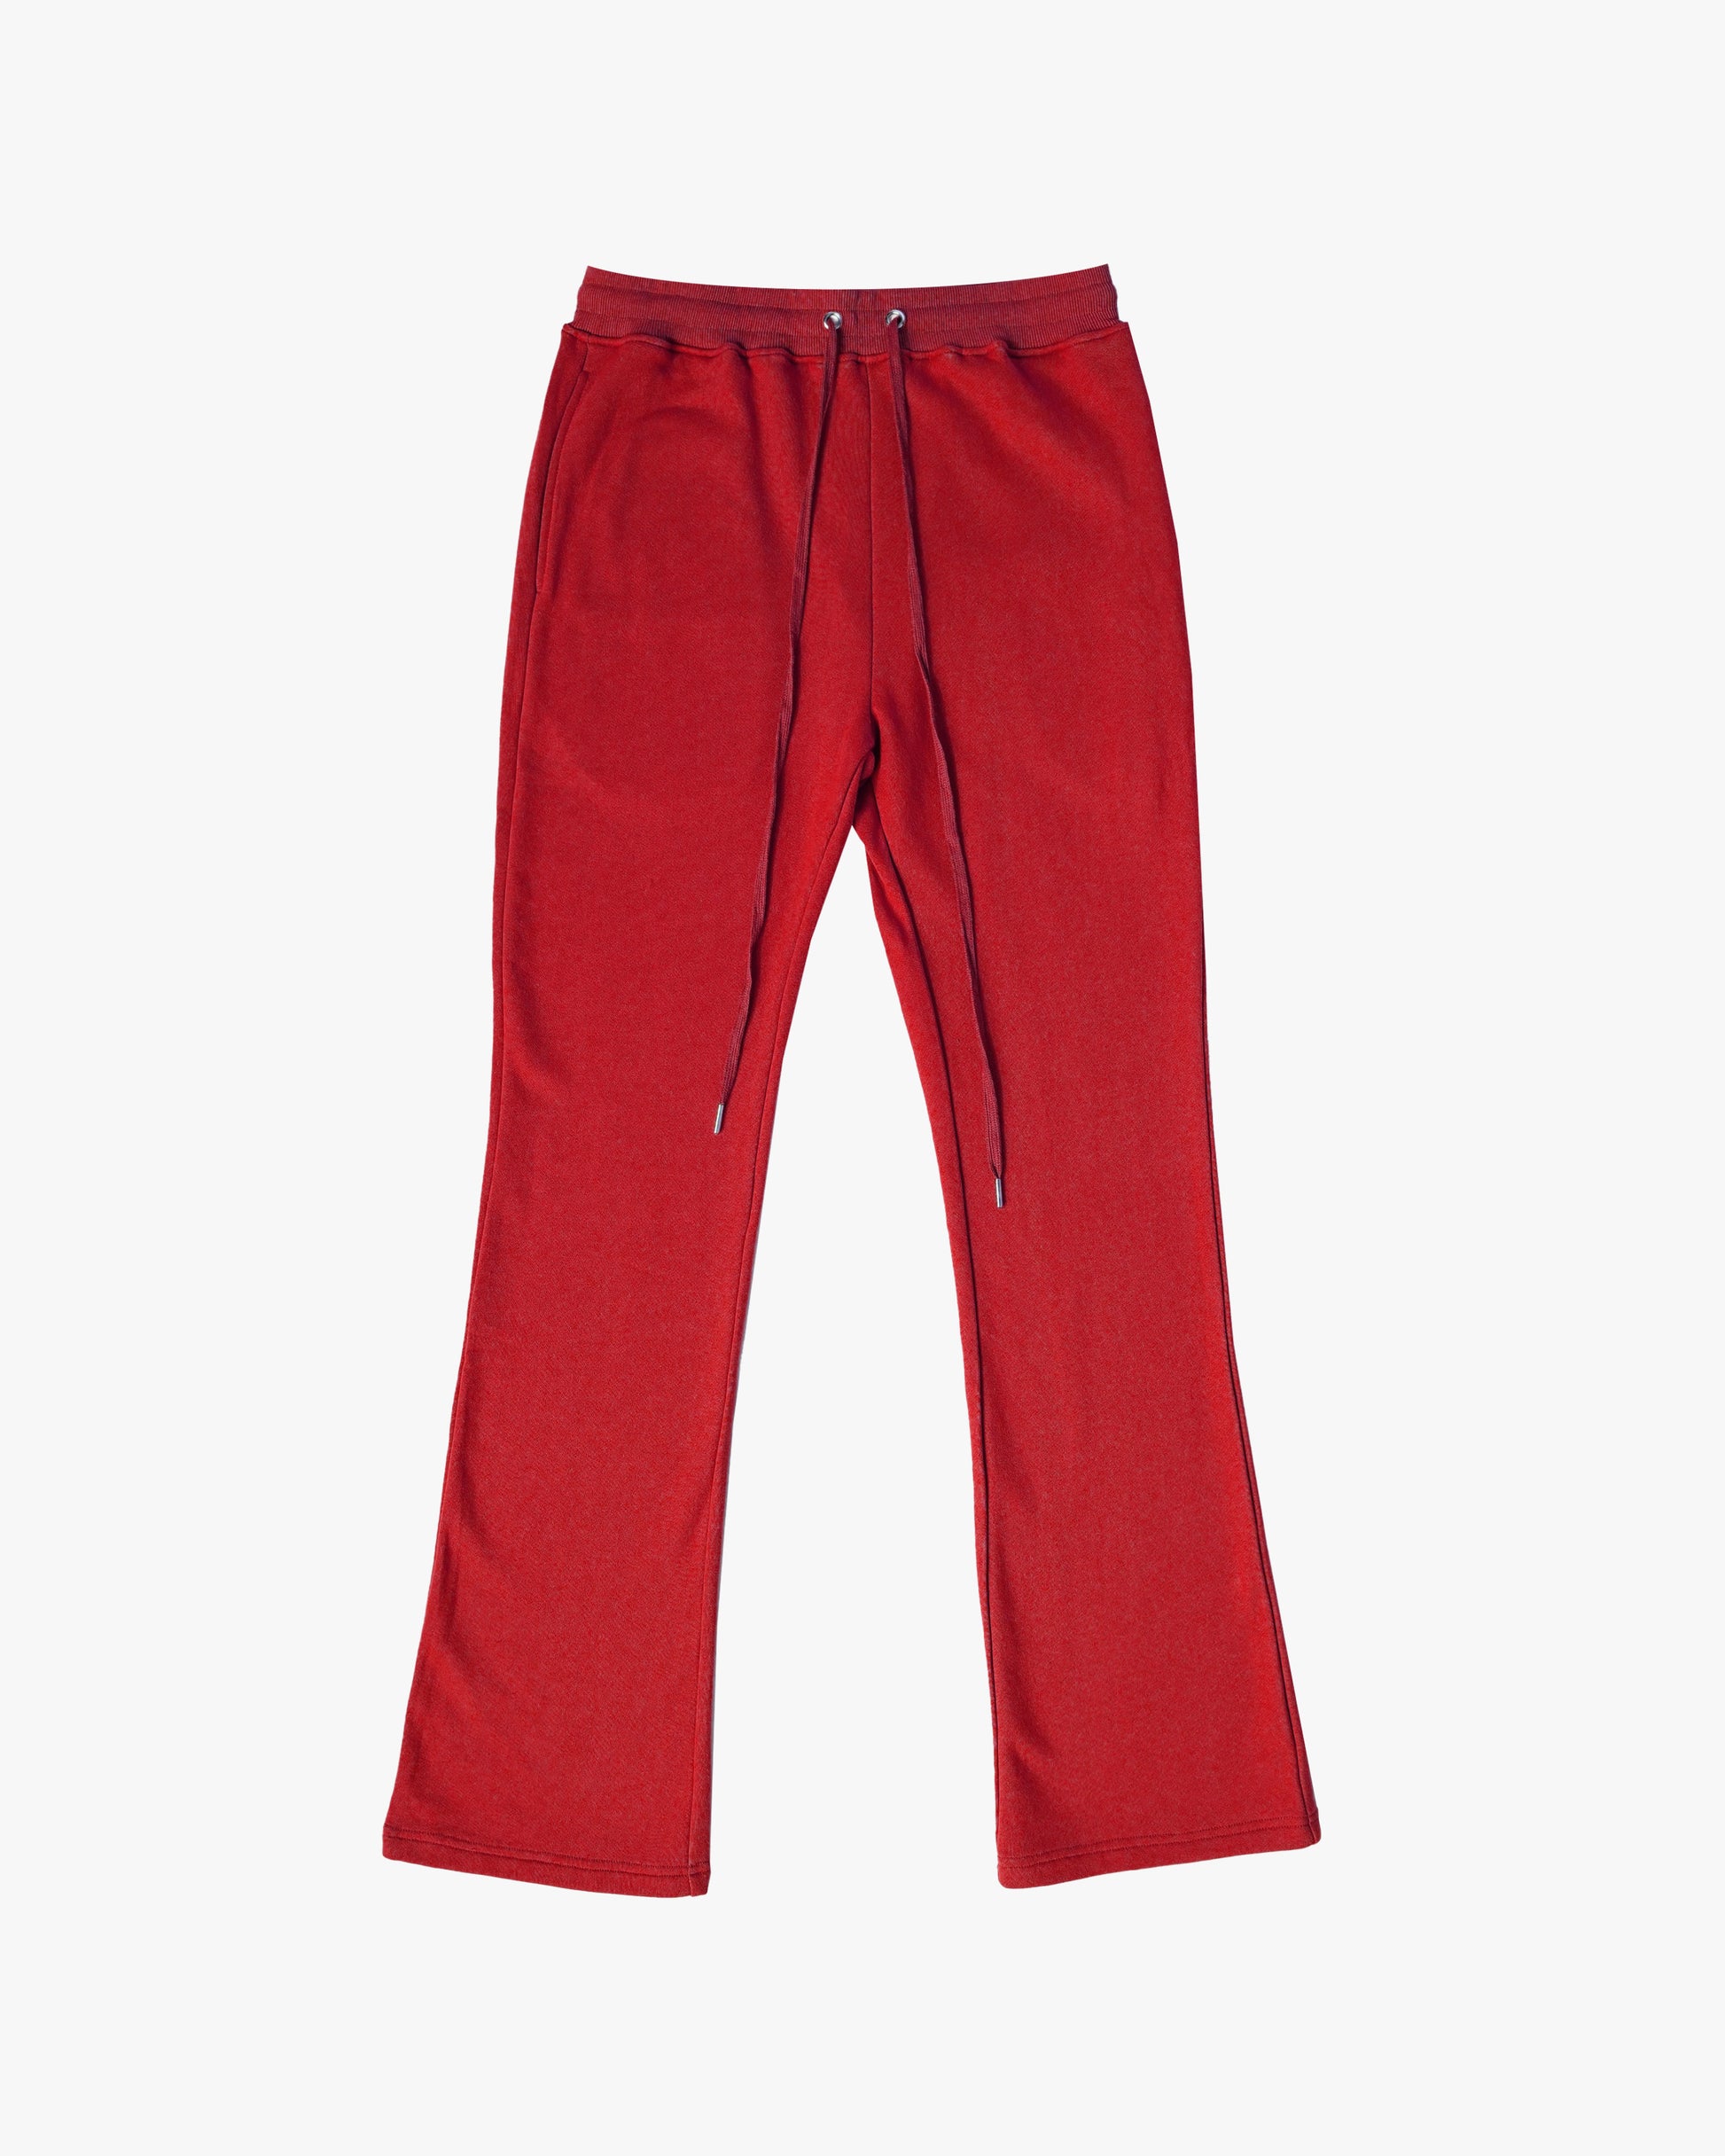 GD French Logo Flare Sweatpants Wide Leg Red Painted